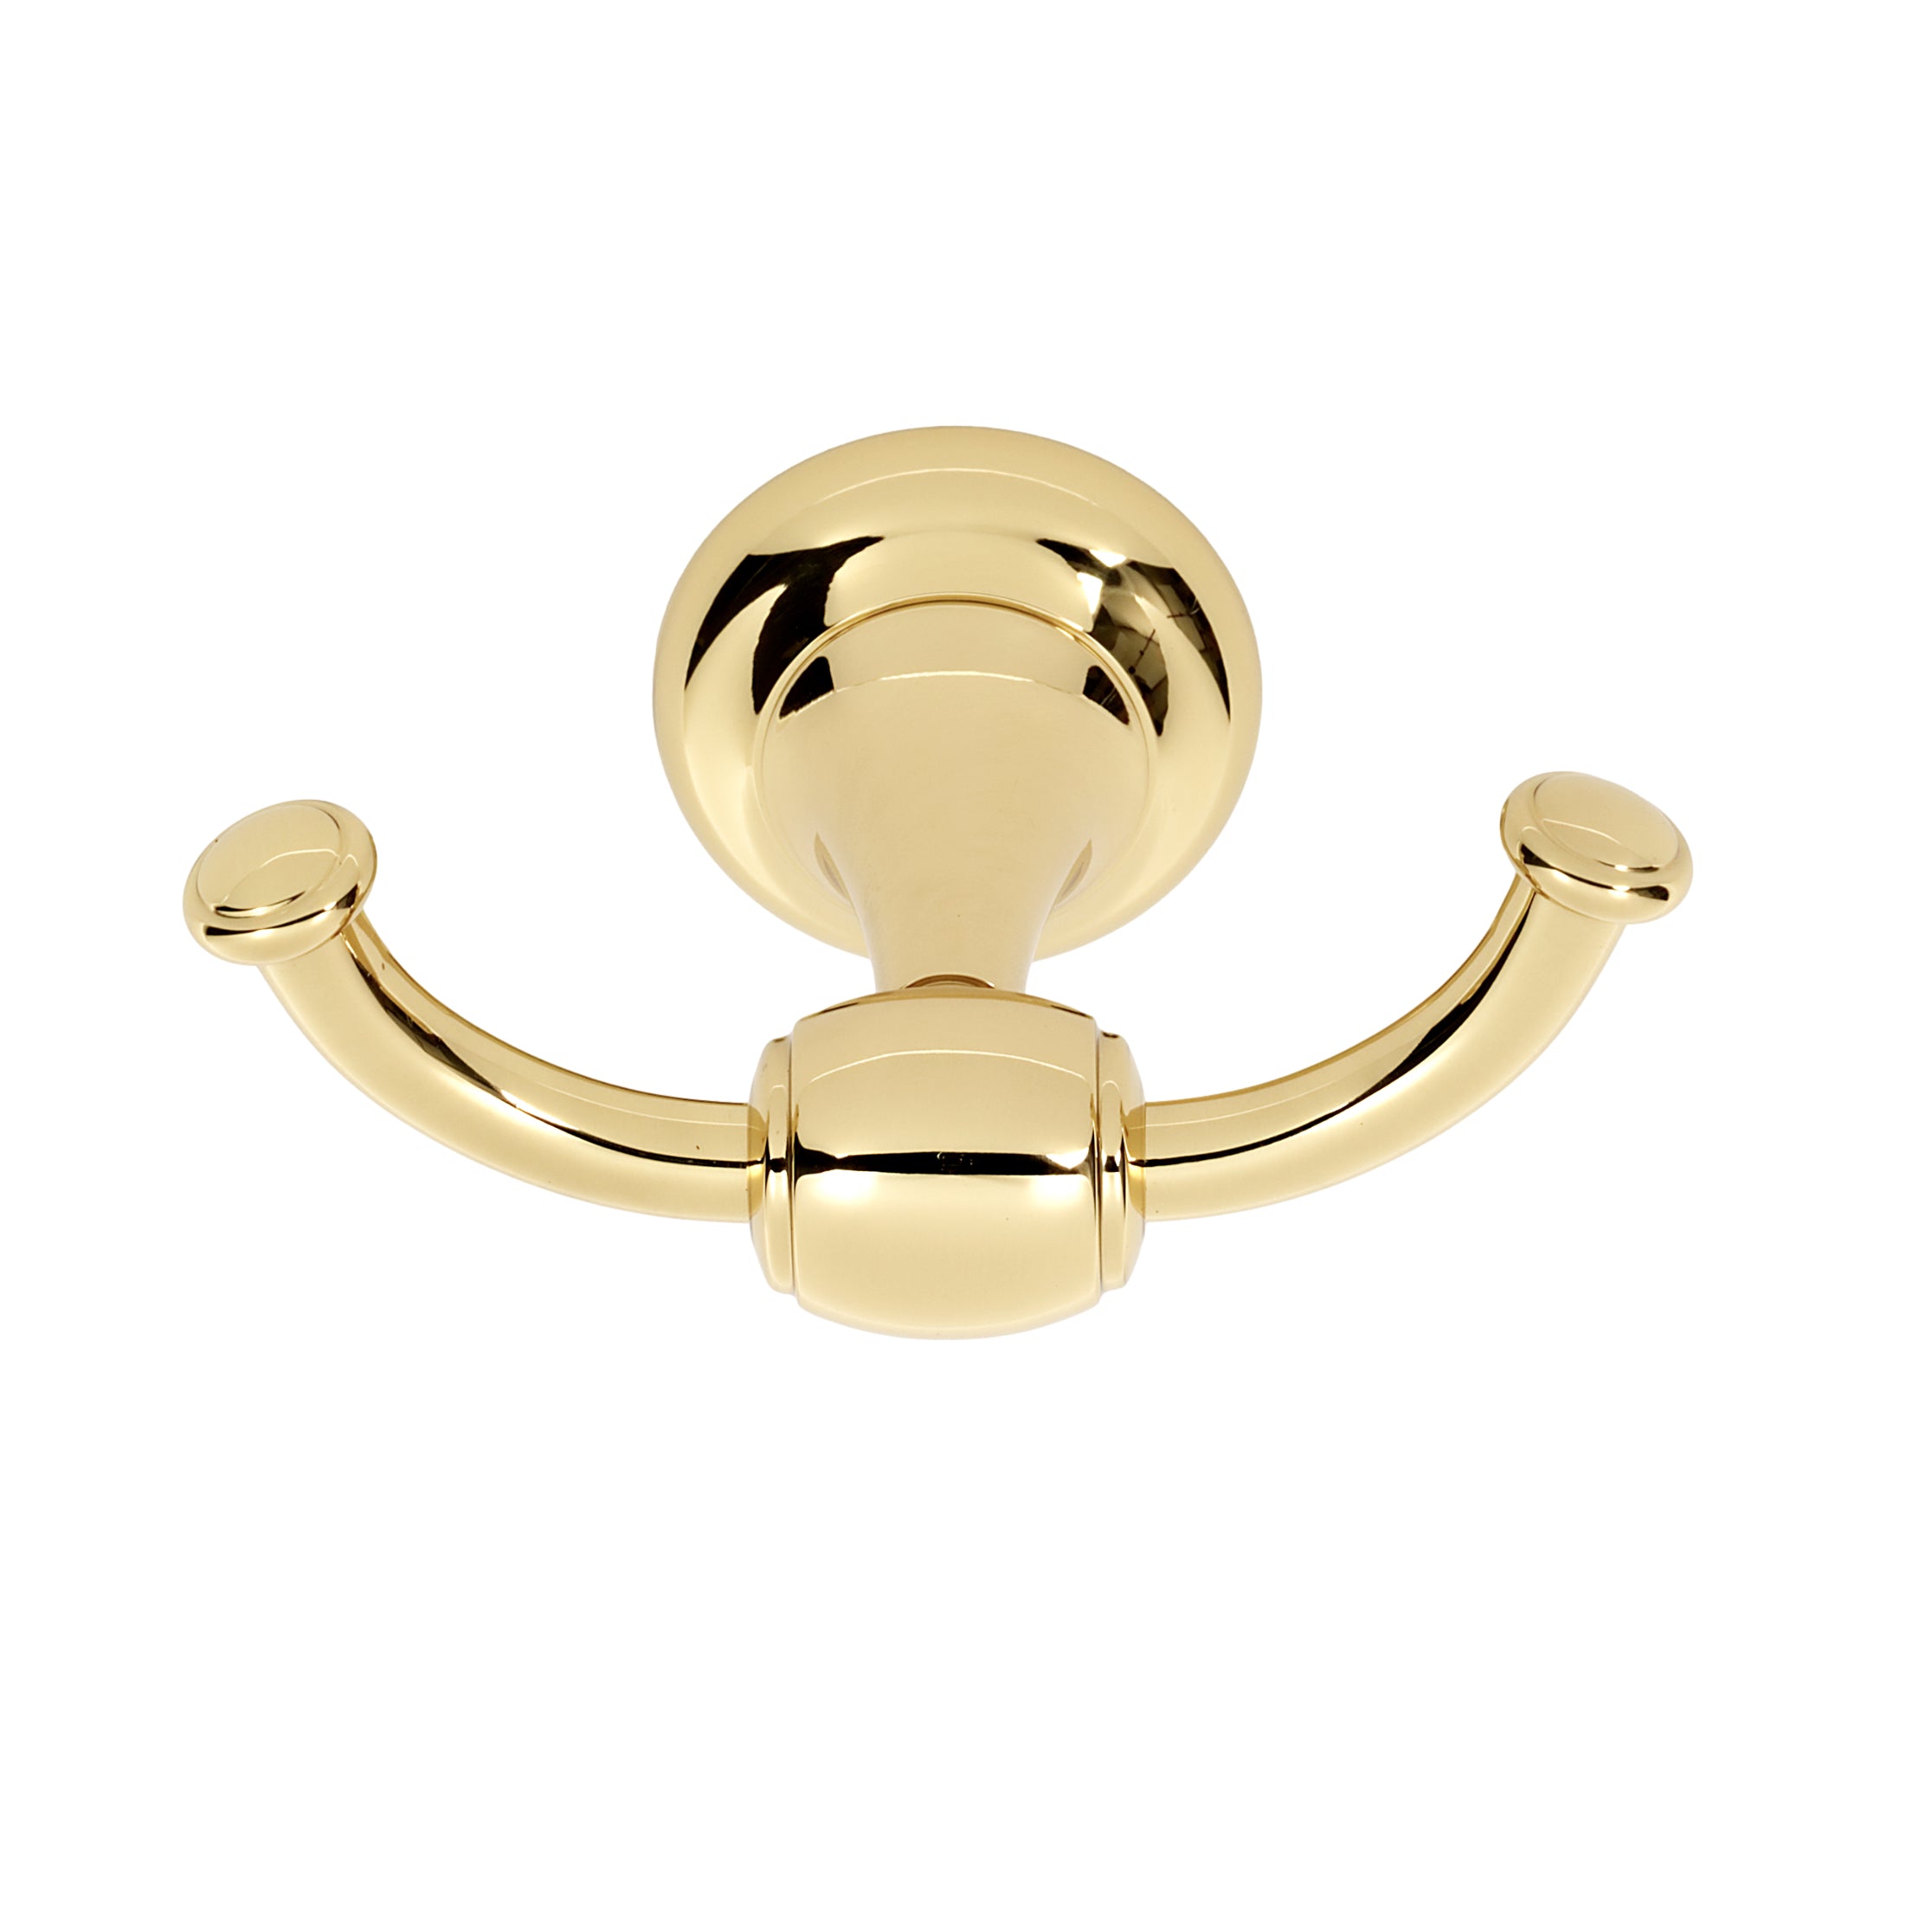 Polished Unlacquered Brass Royale Double Wall Coat Hook